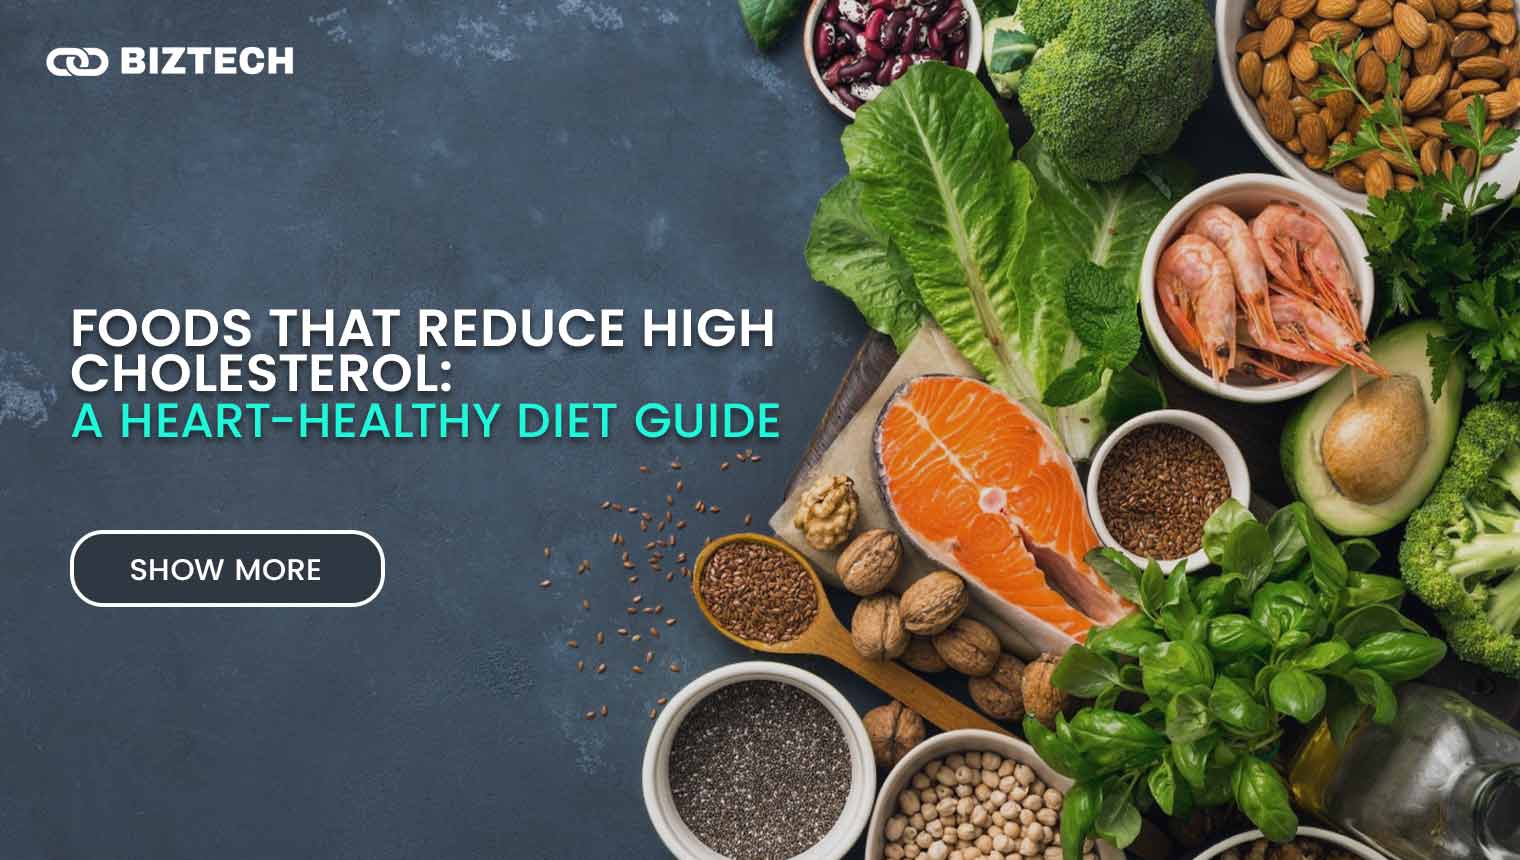 Foods That Reduce High Cholesterol: A Heart-Healthy Diet Guide